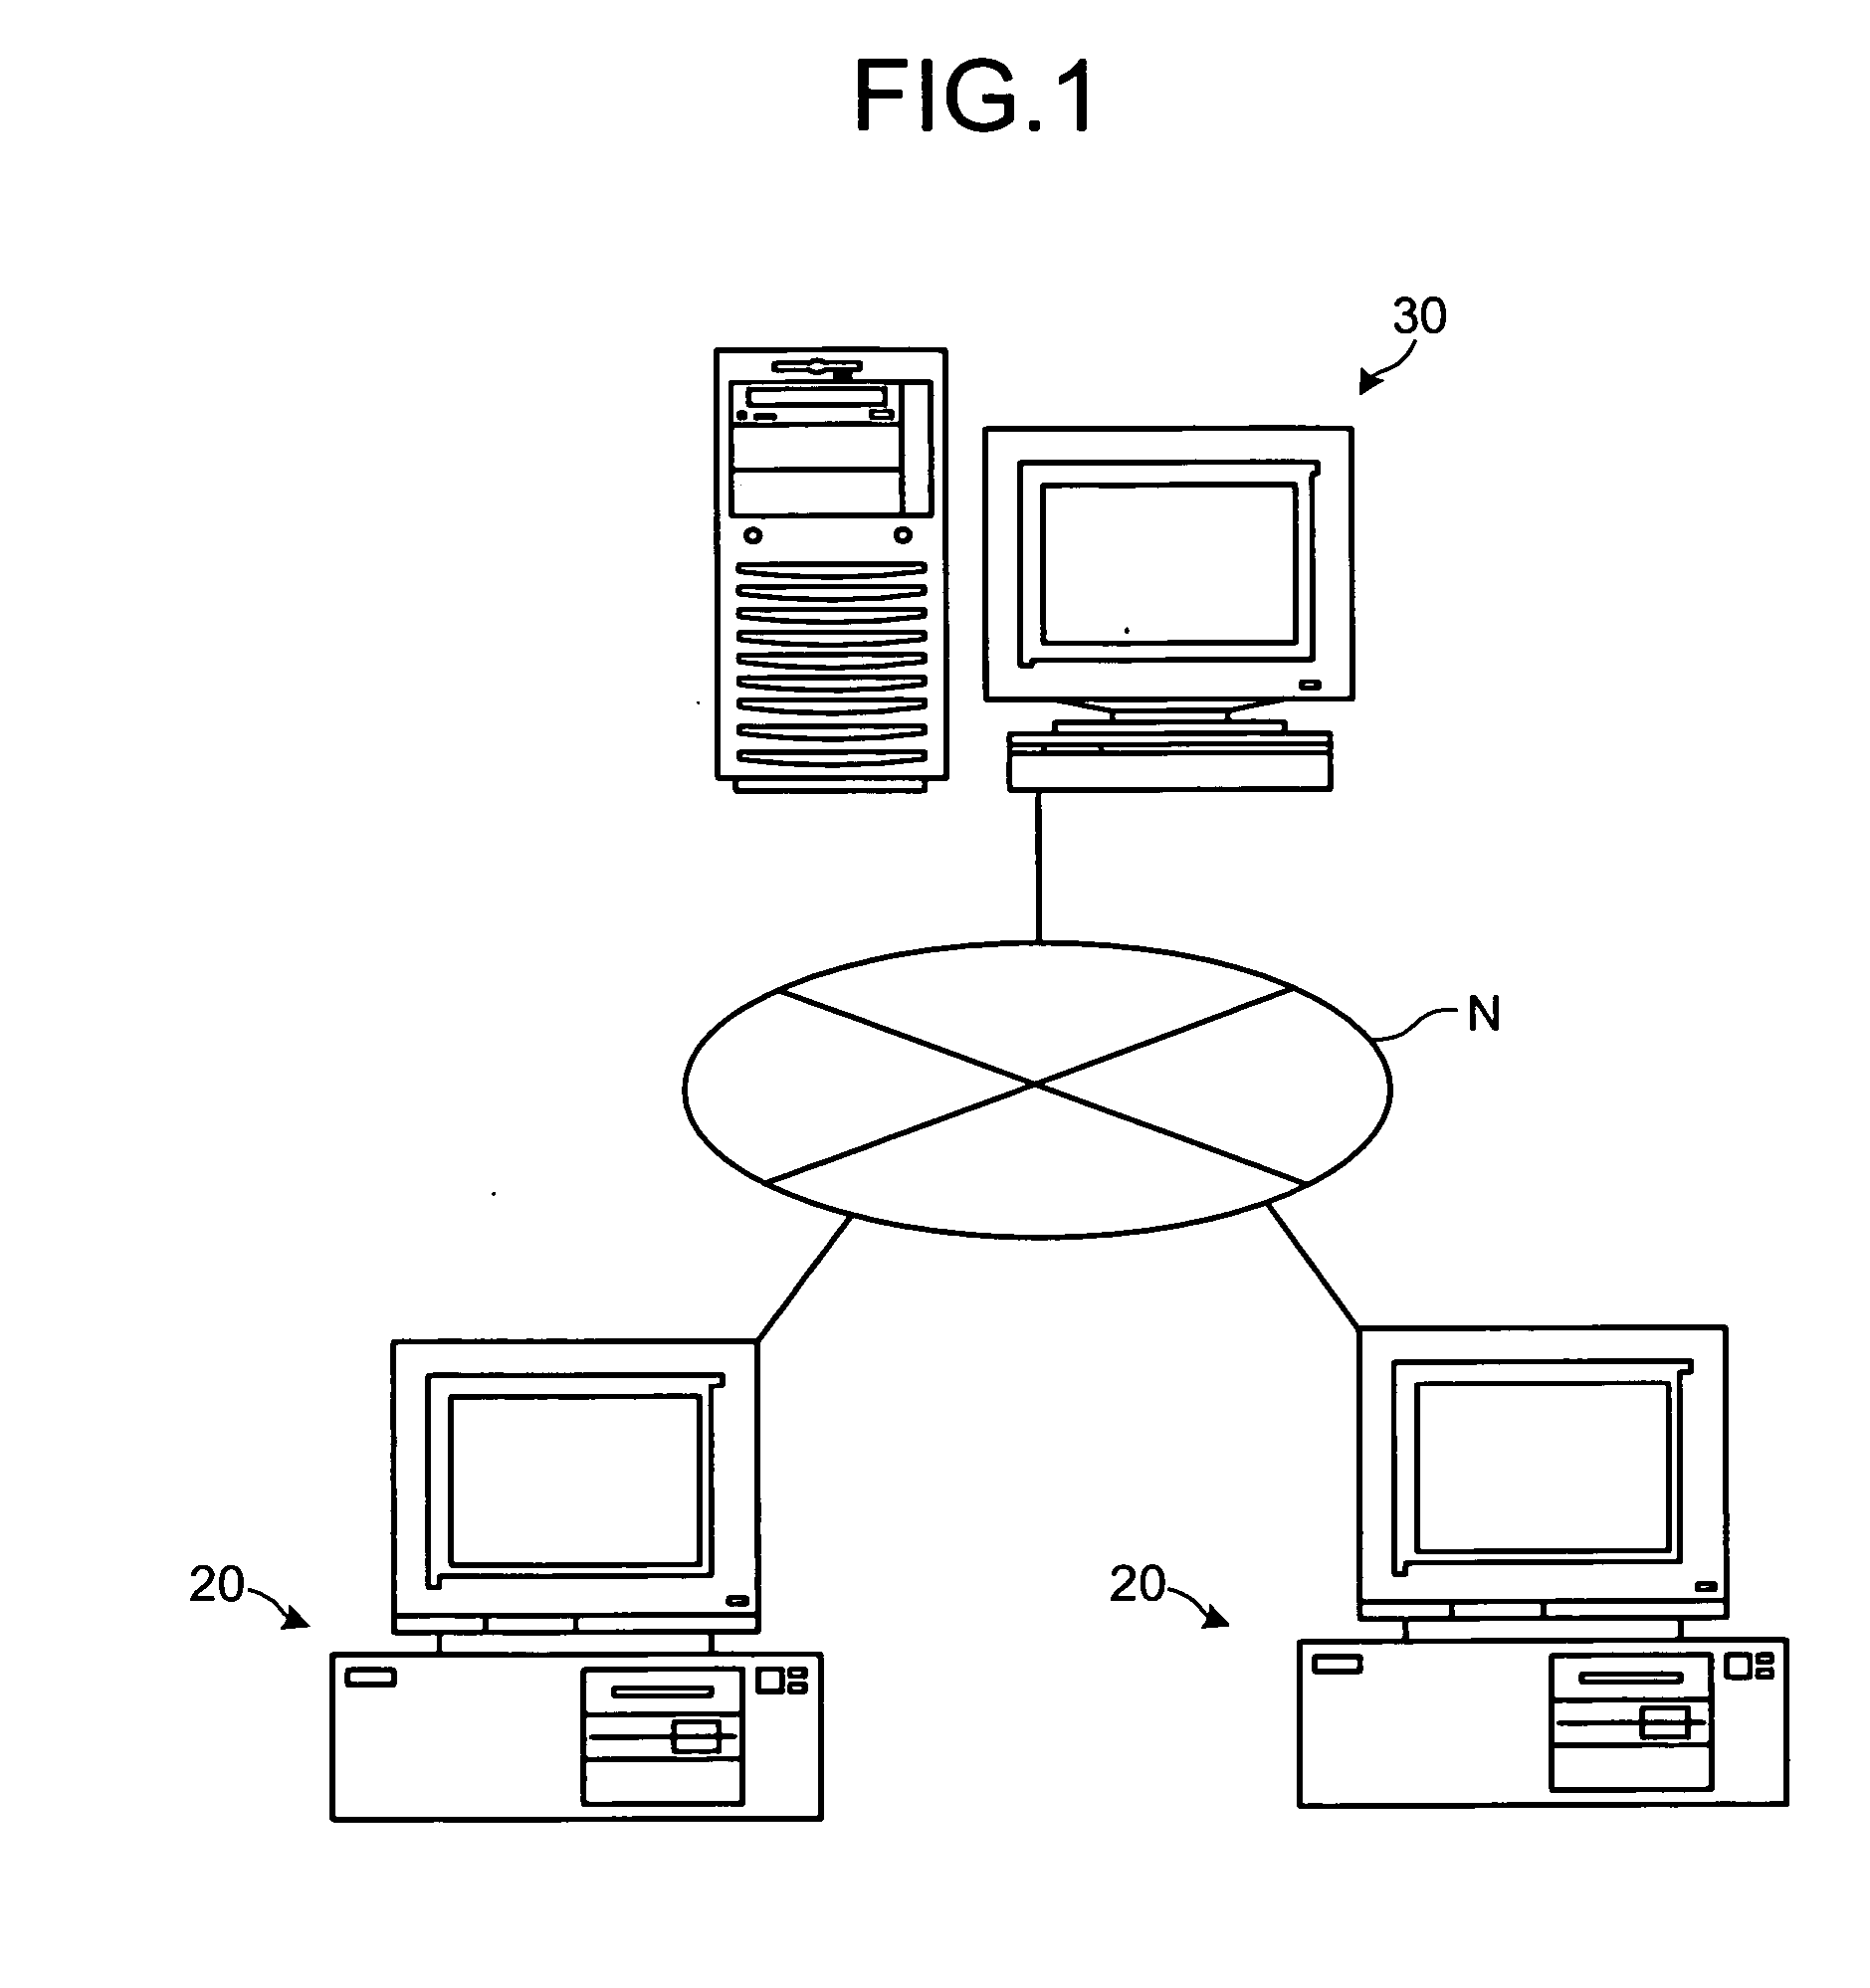 Contents viewing system, contents viewing method, and computer program product